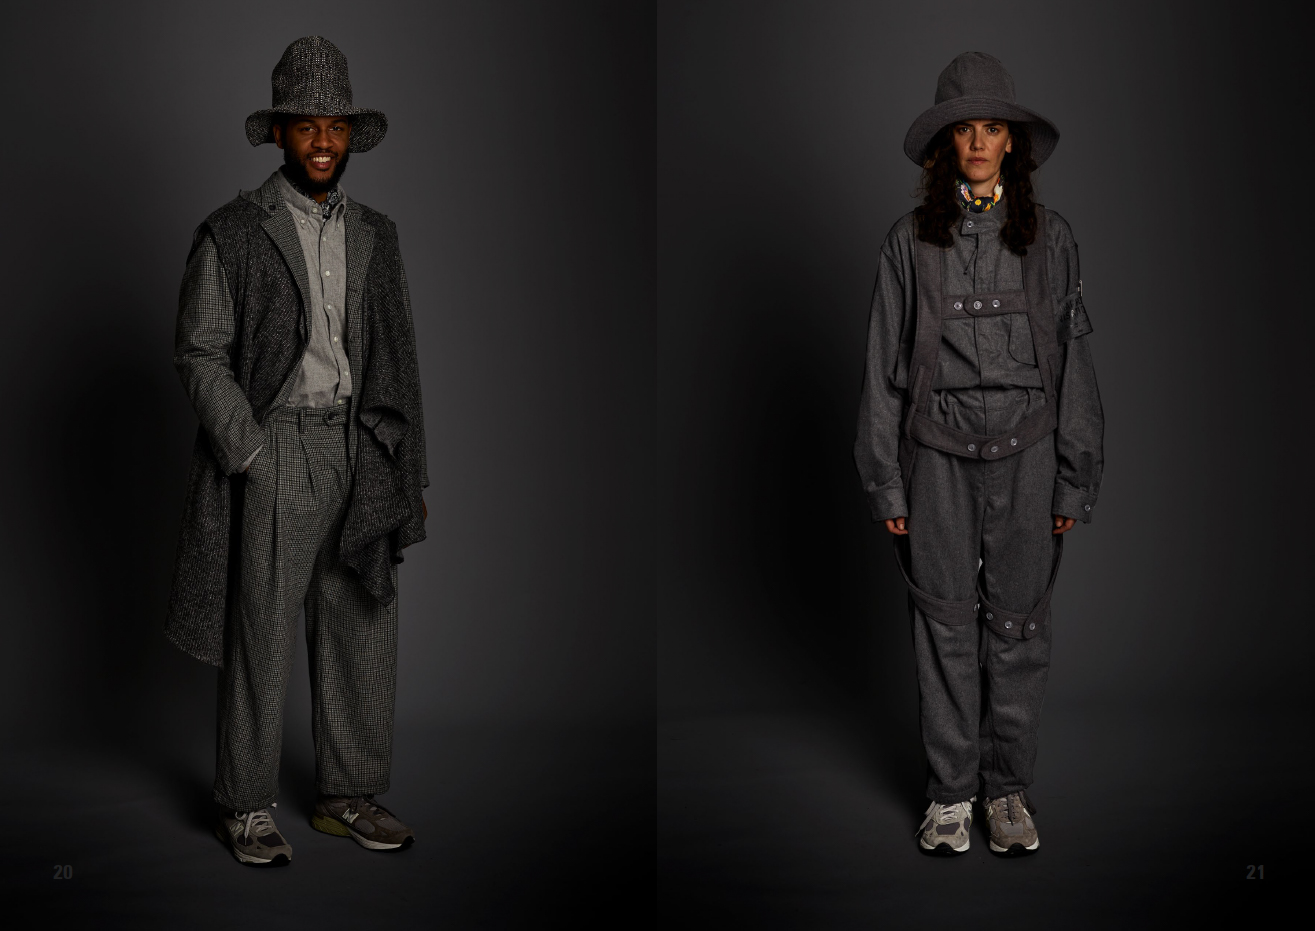 roman-yee-nepenthes-engineered-garments-fashion-beauty-editorial-commercial-photography-nyc-lookbook-12.JPEG